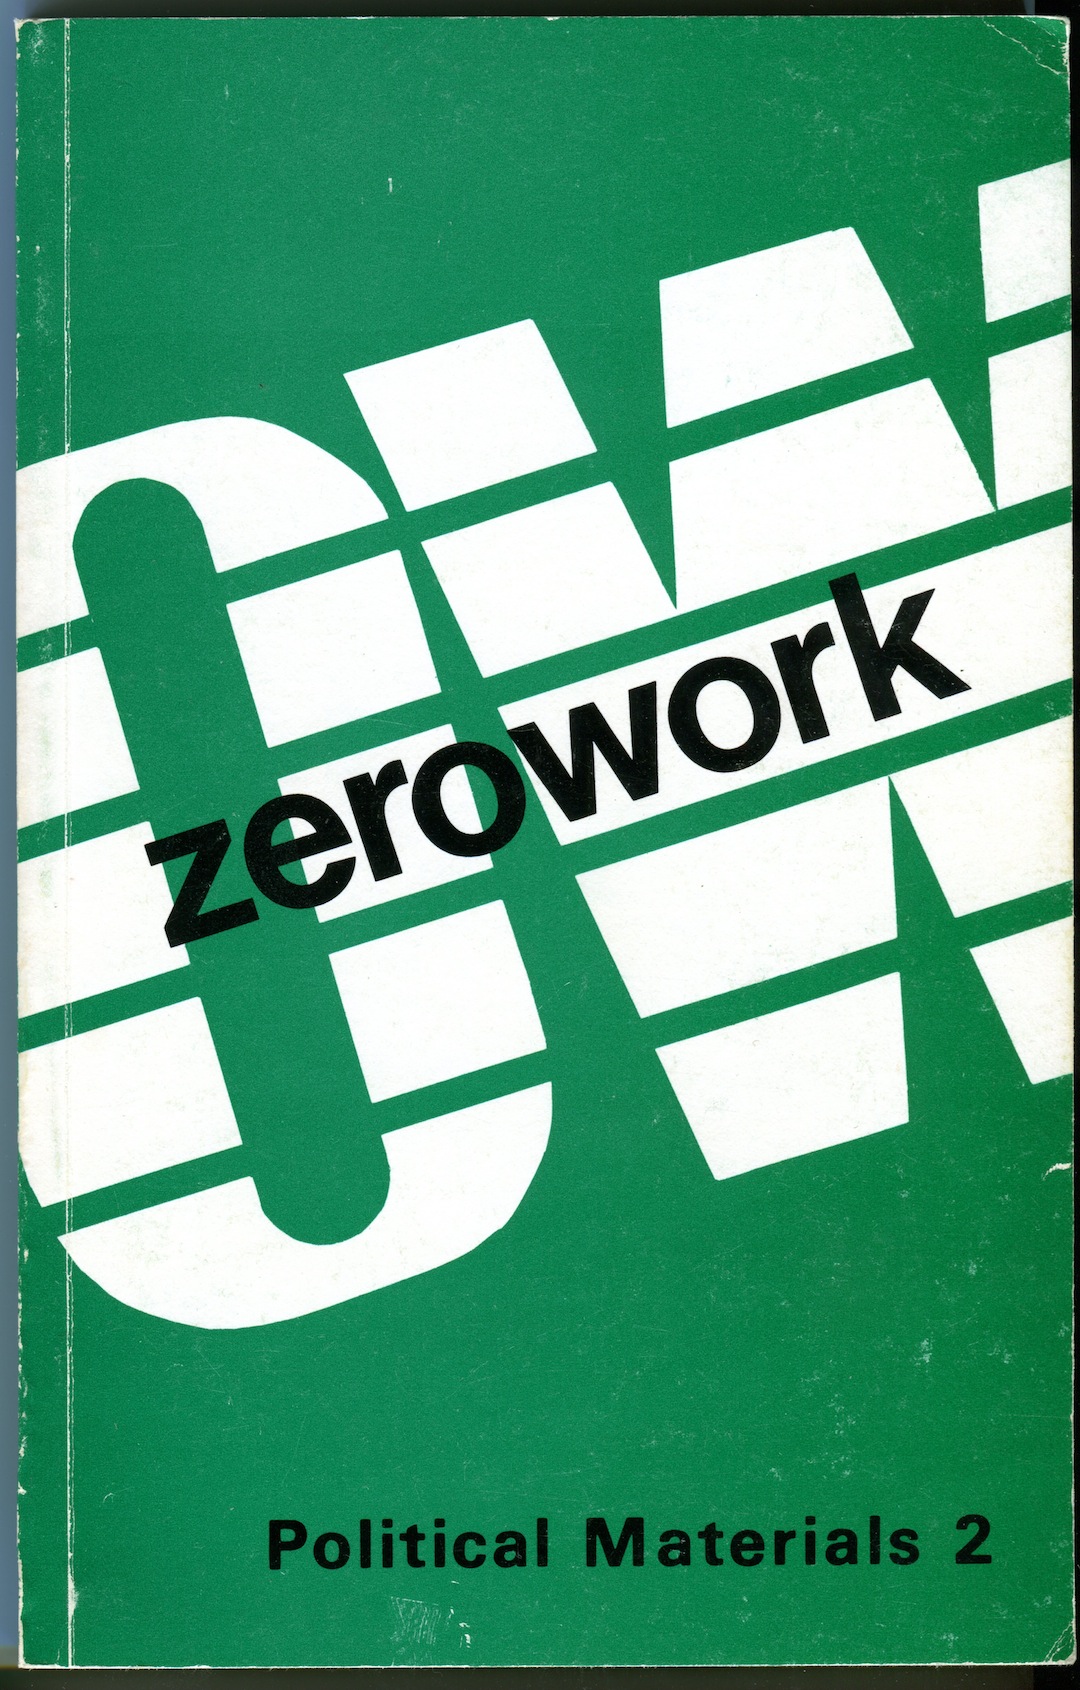 Zerowork. Political Material 1. Fall 1977